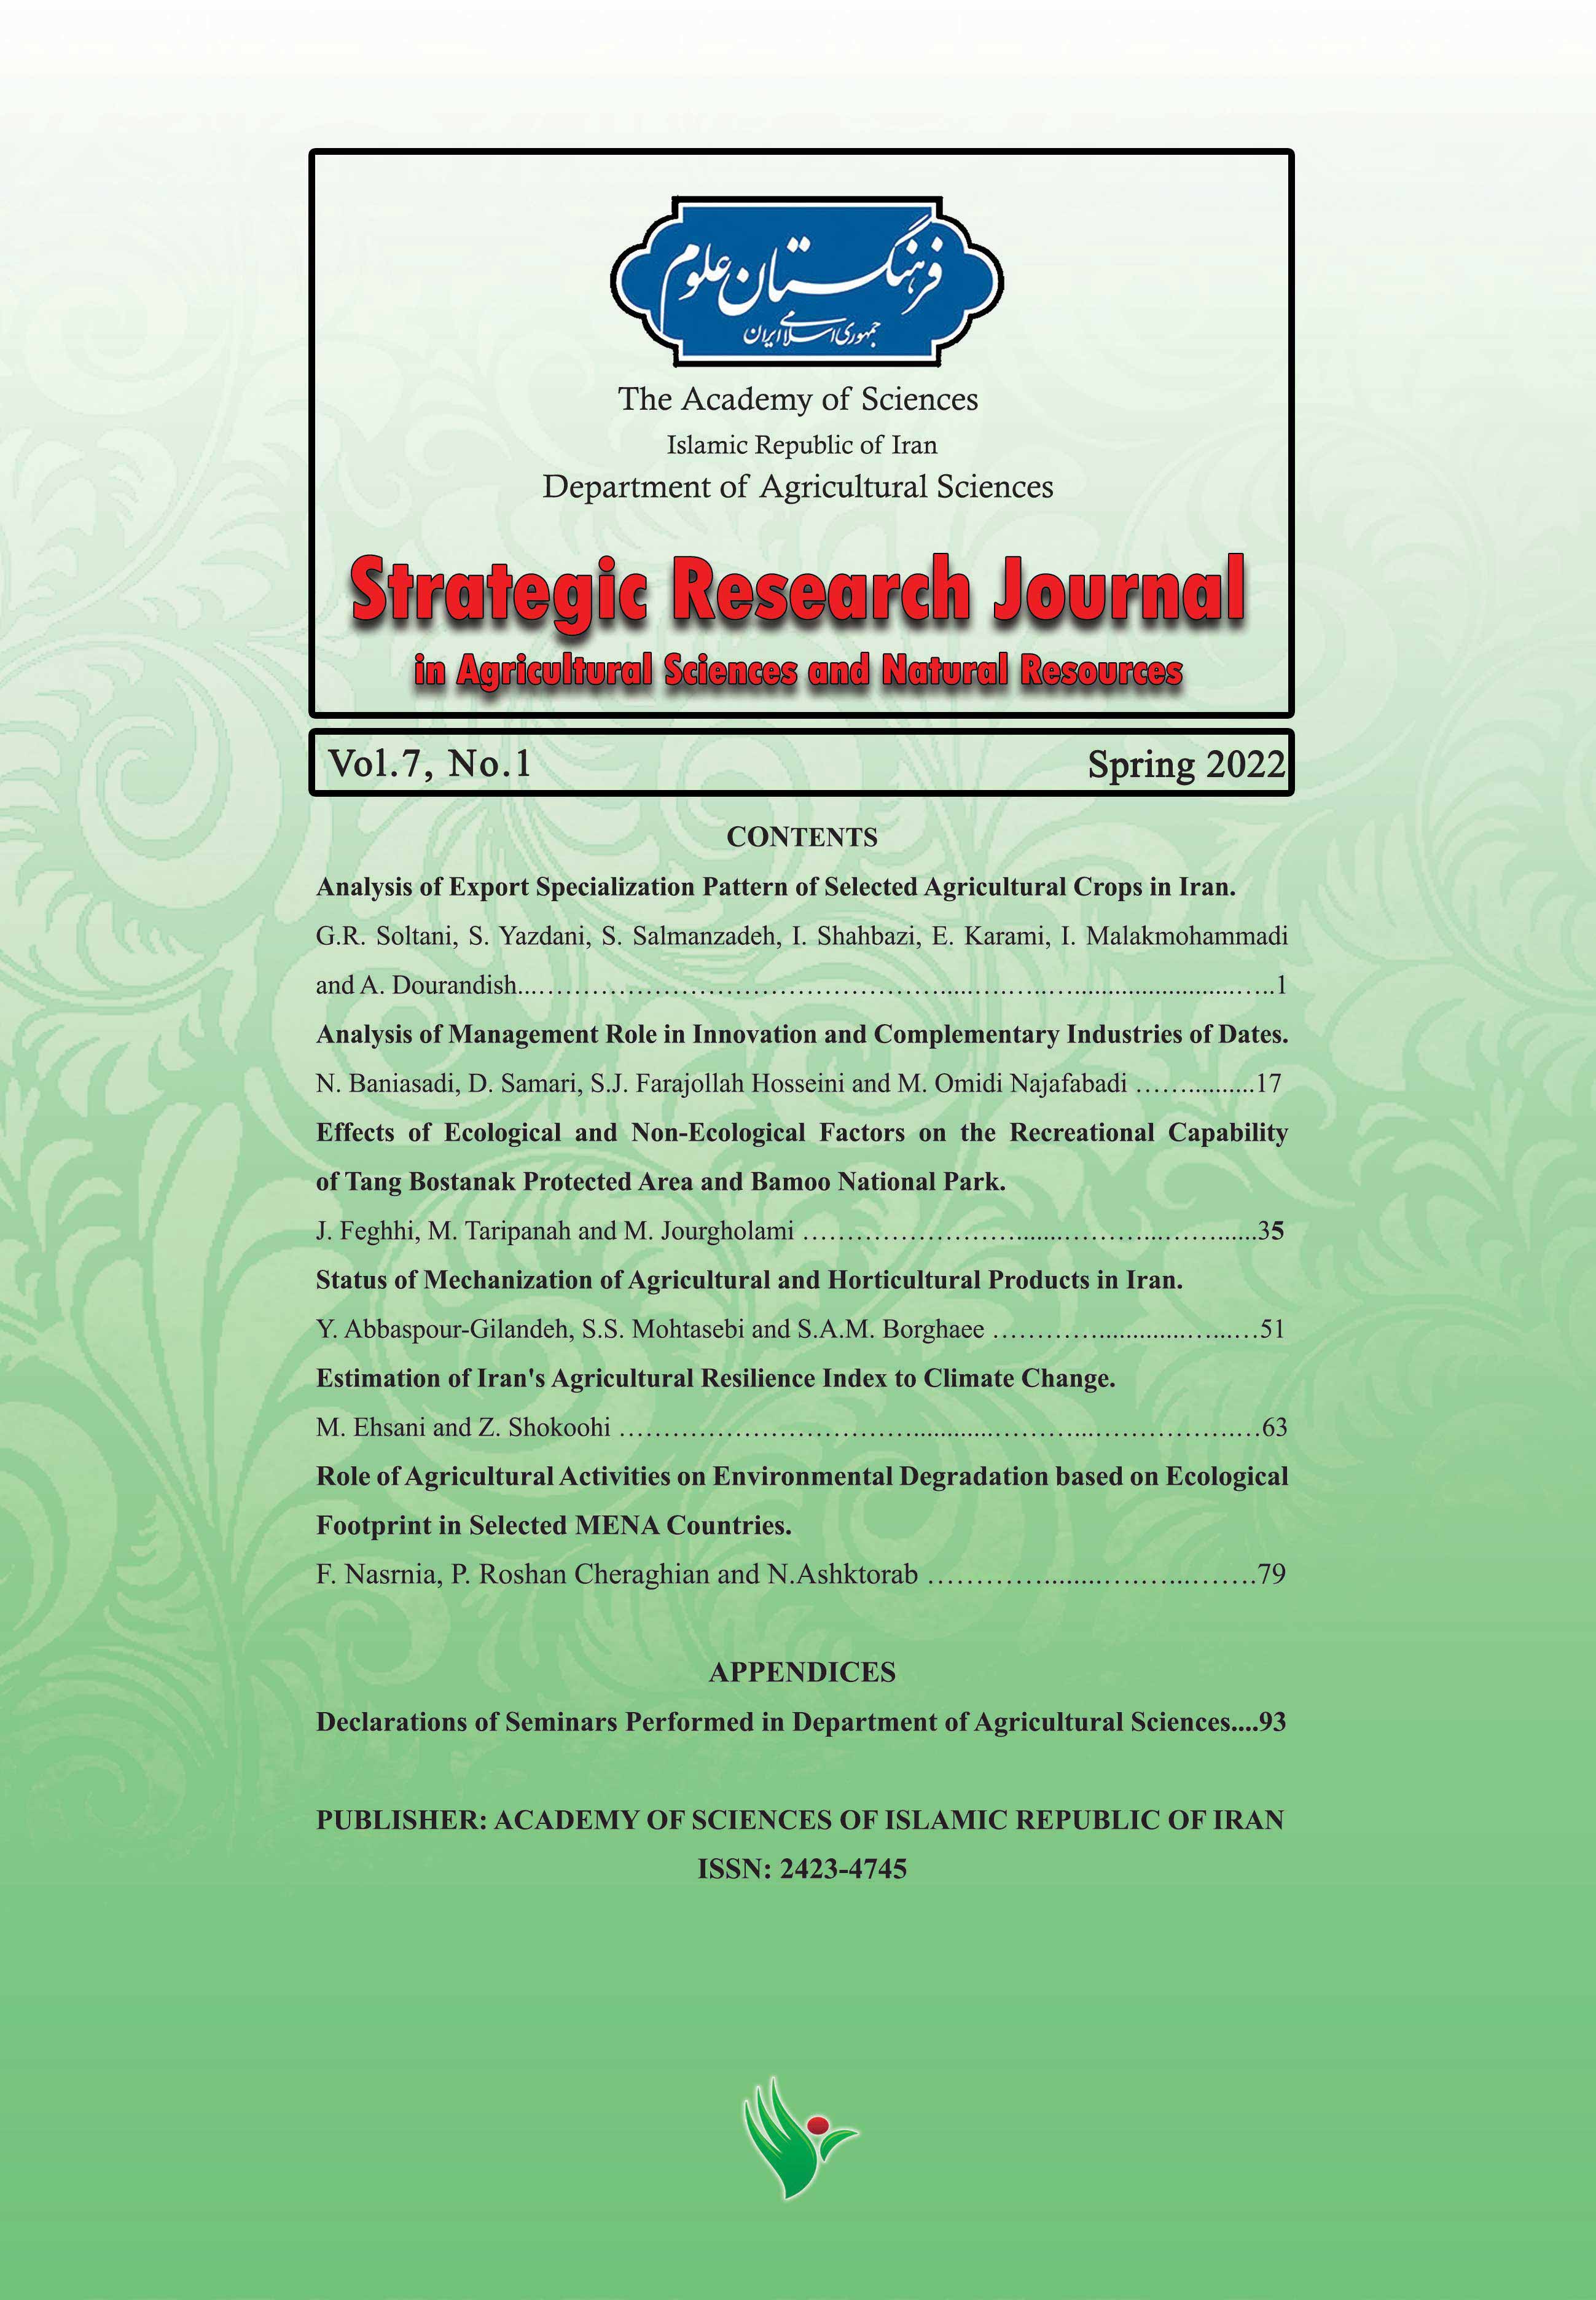 Strategic Research Journal of Agricultural Sciences and Natural Resources